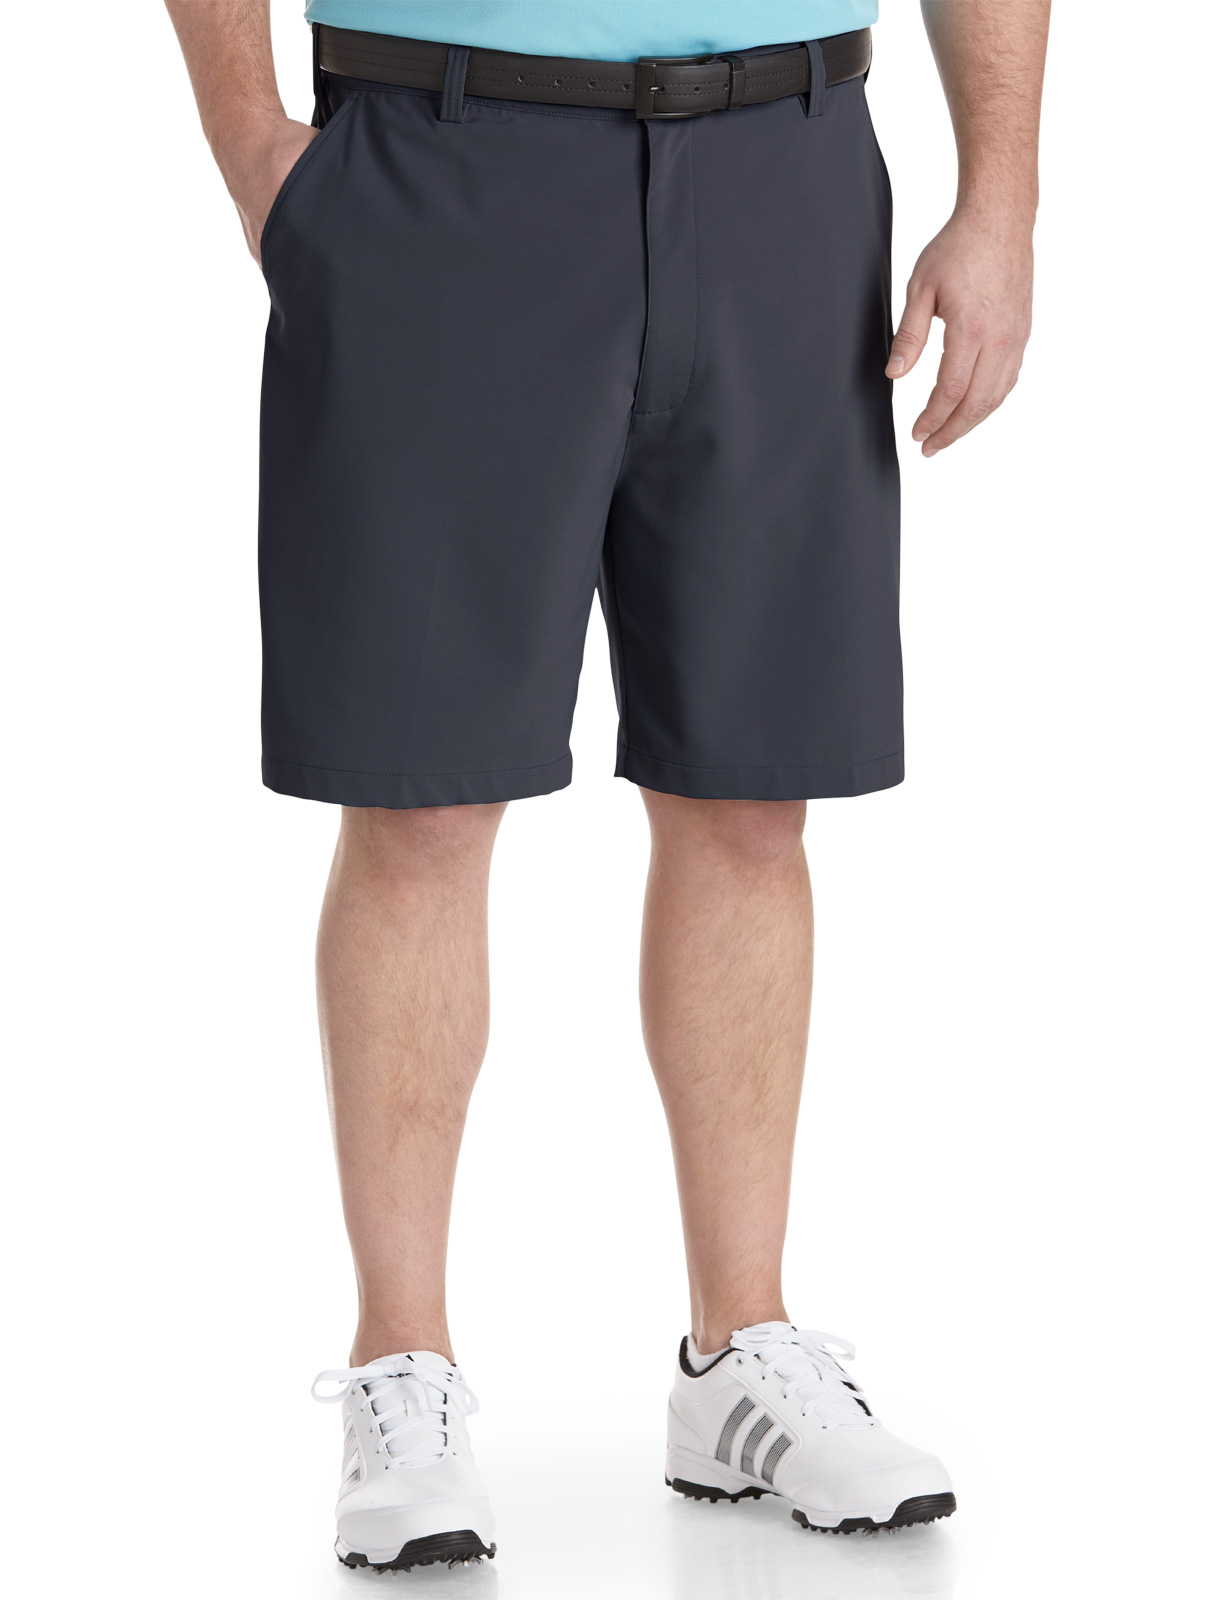 Reebok Men's Big and Tall Flat-Front Solid Shorts